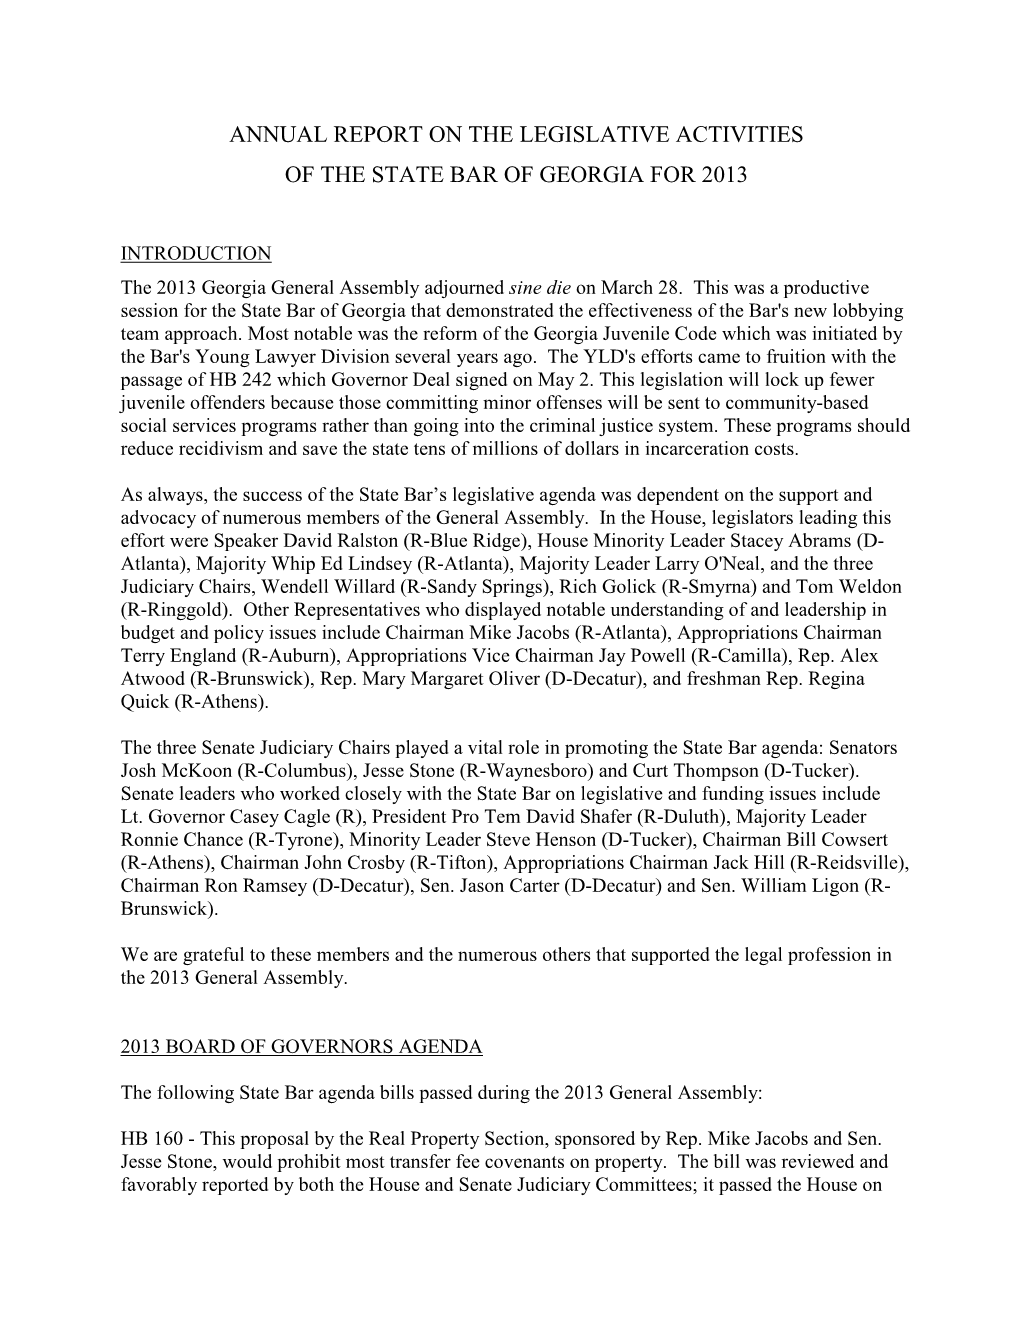 Annual Report on the Legislative Activities of the State Bar of Georgia for 2013